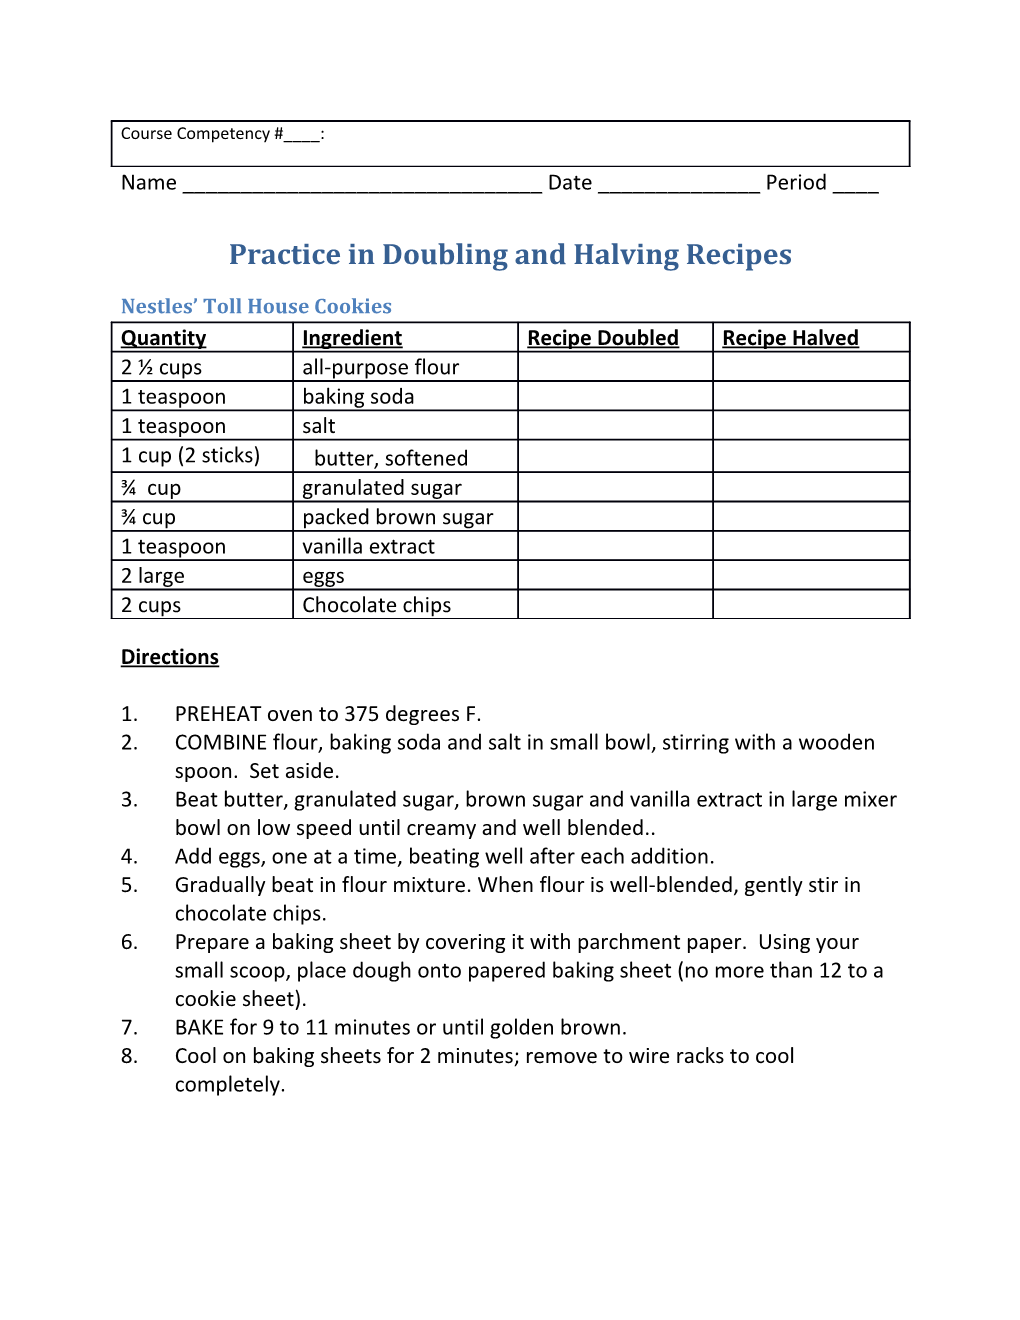 Practice in Doubling and Halving Recipes